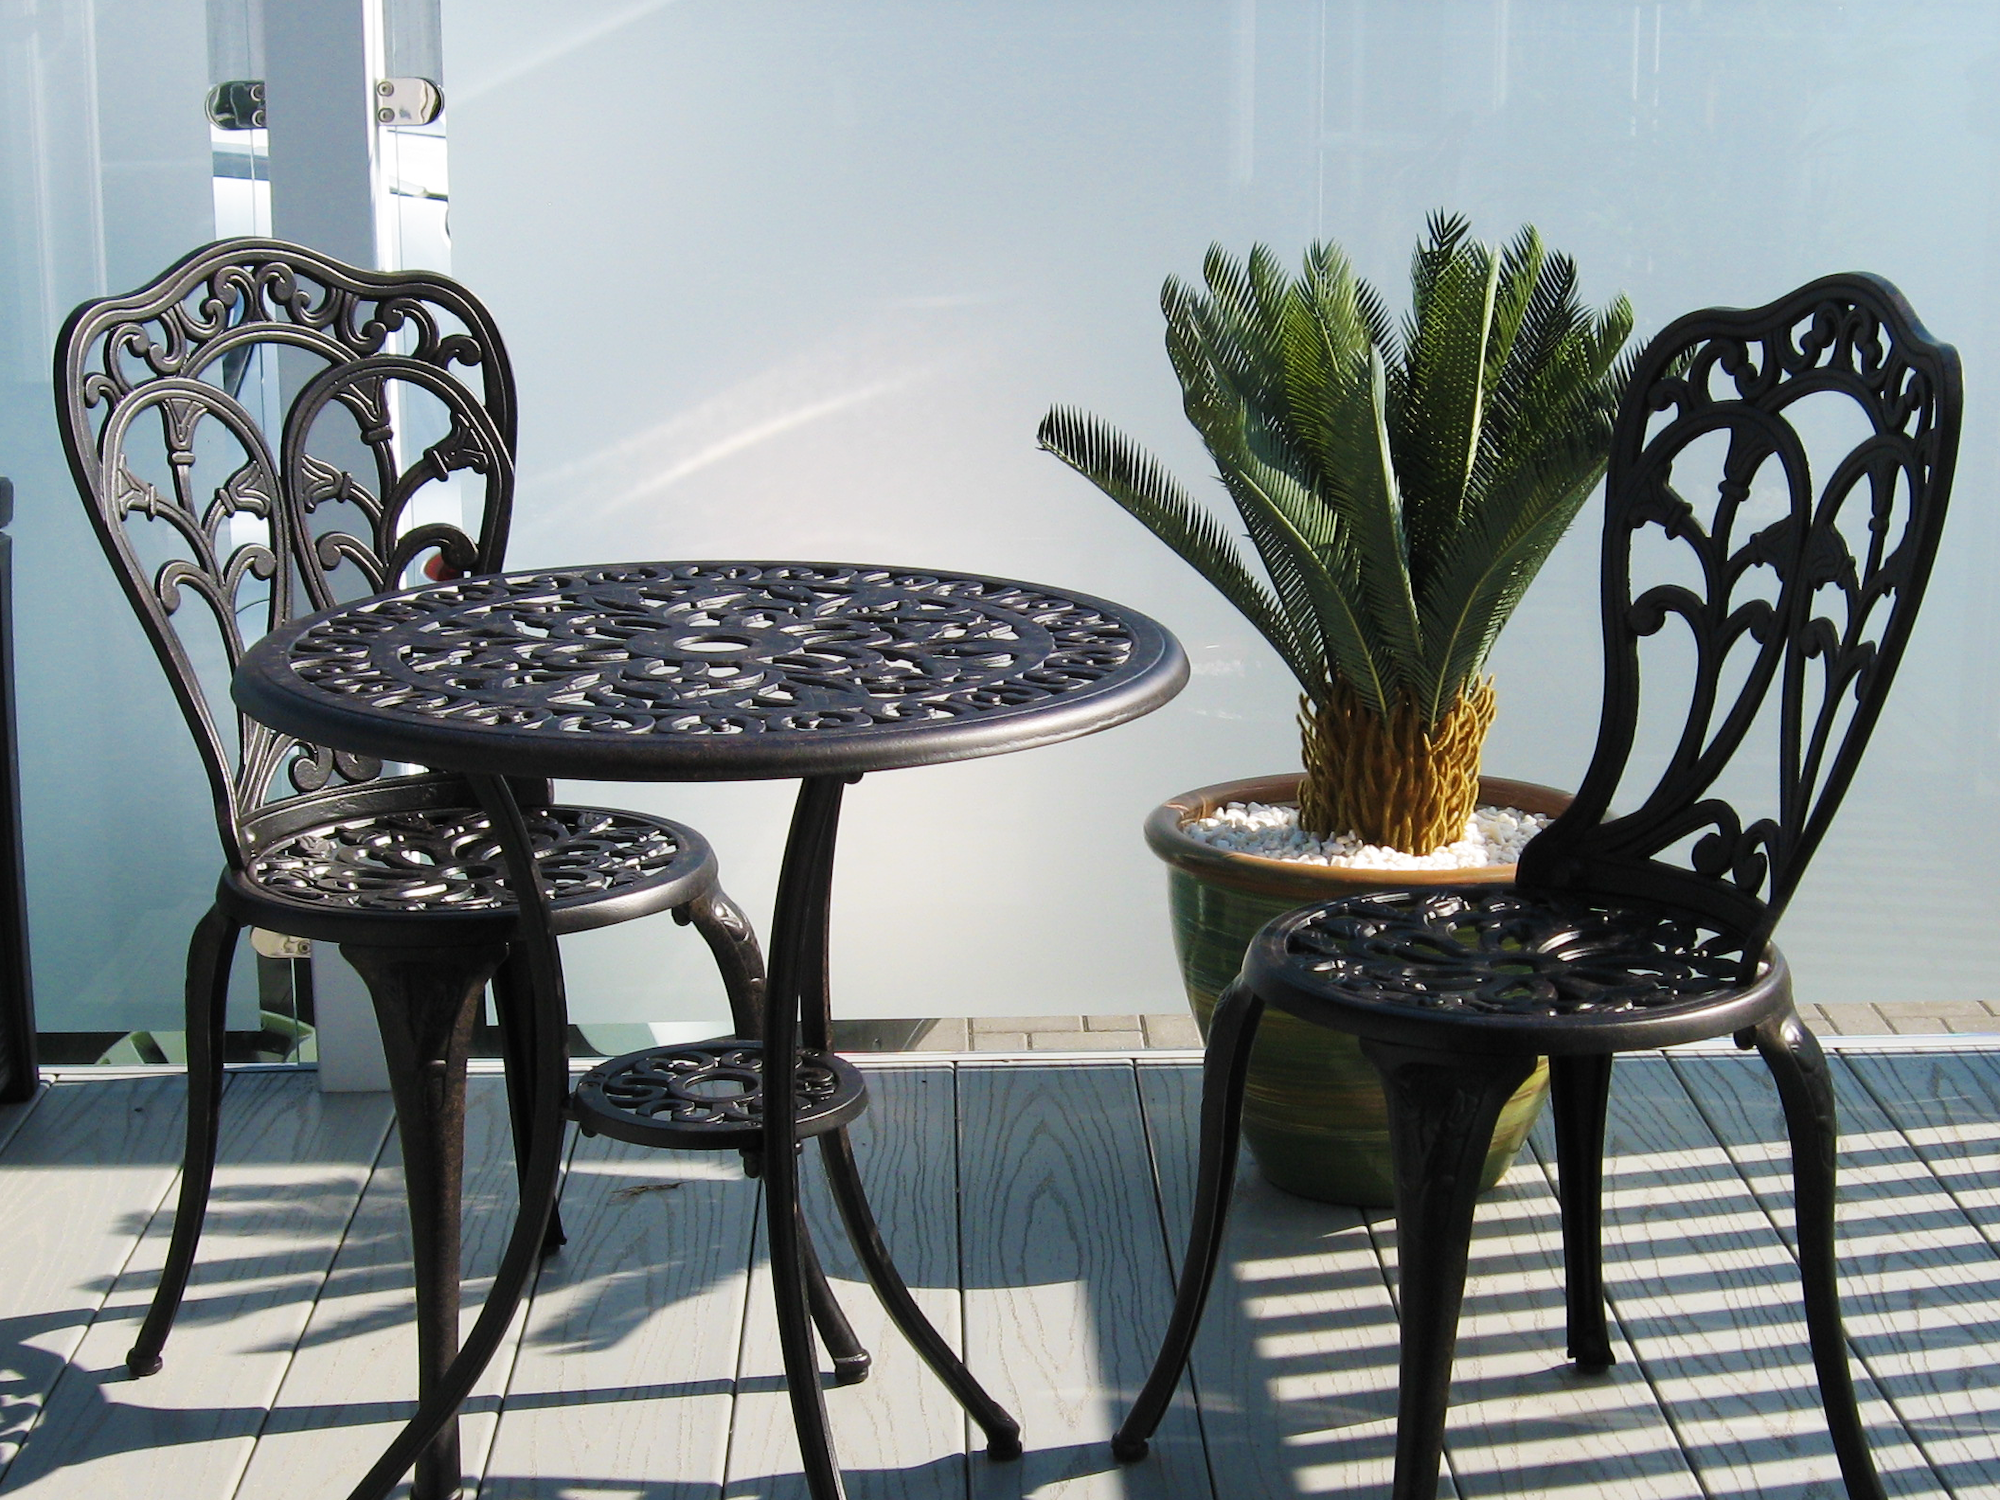 Why do we think cast aluminium is a great choice for your balcony?